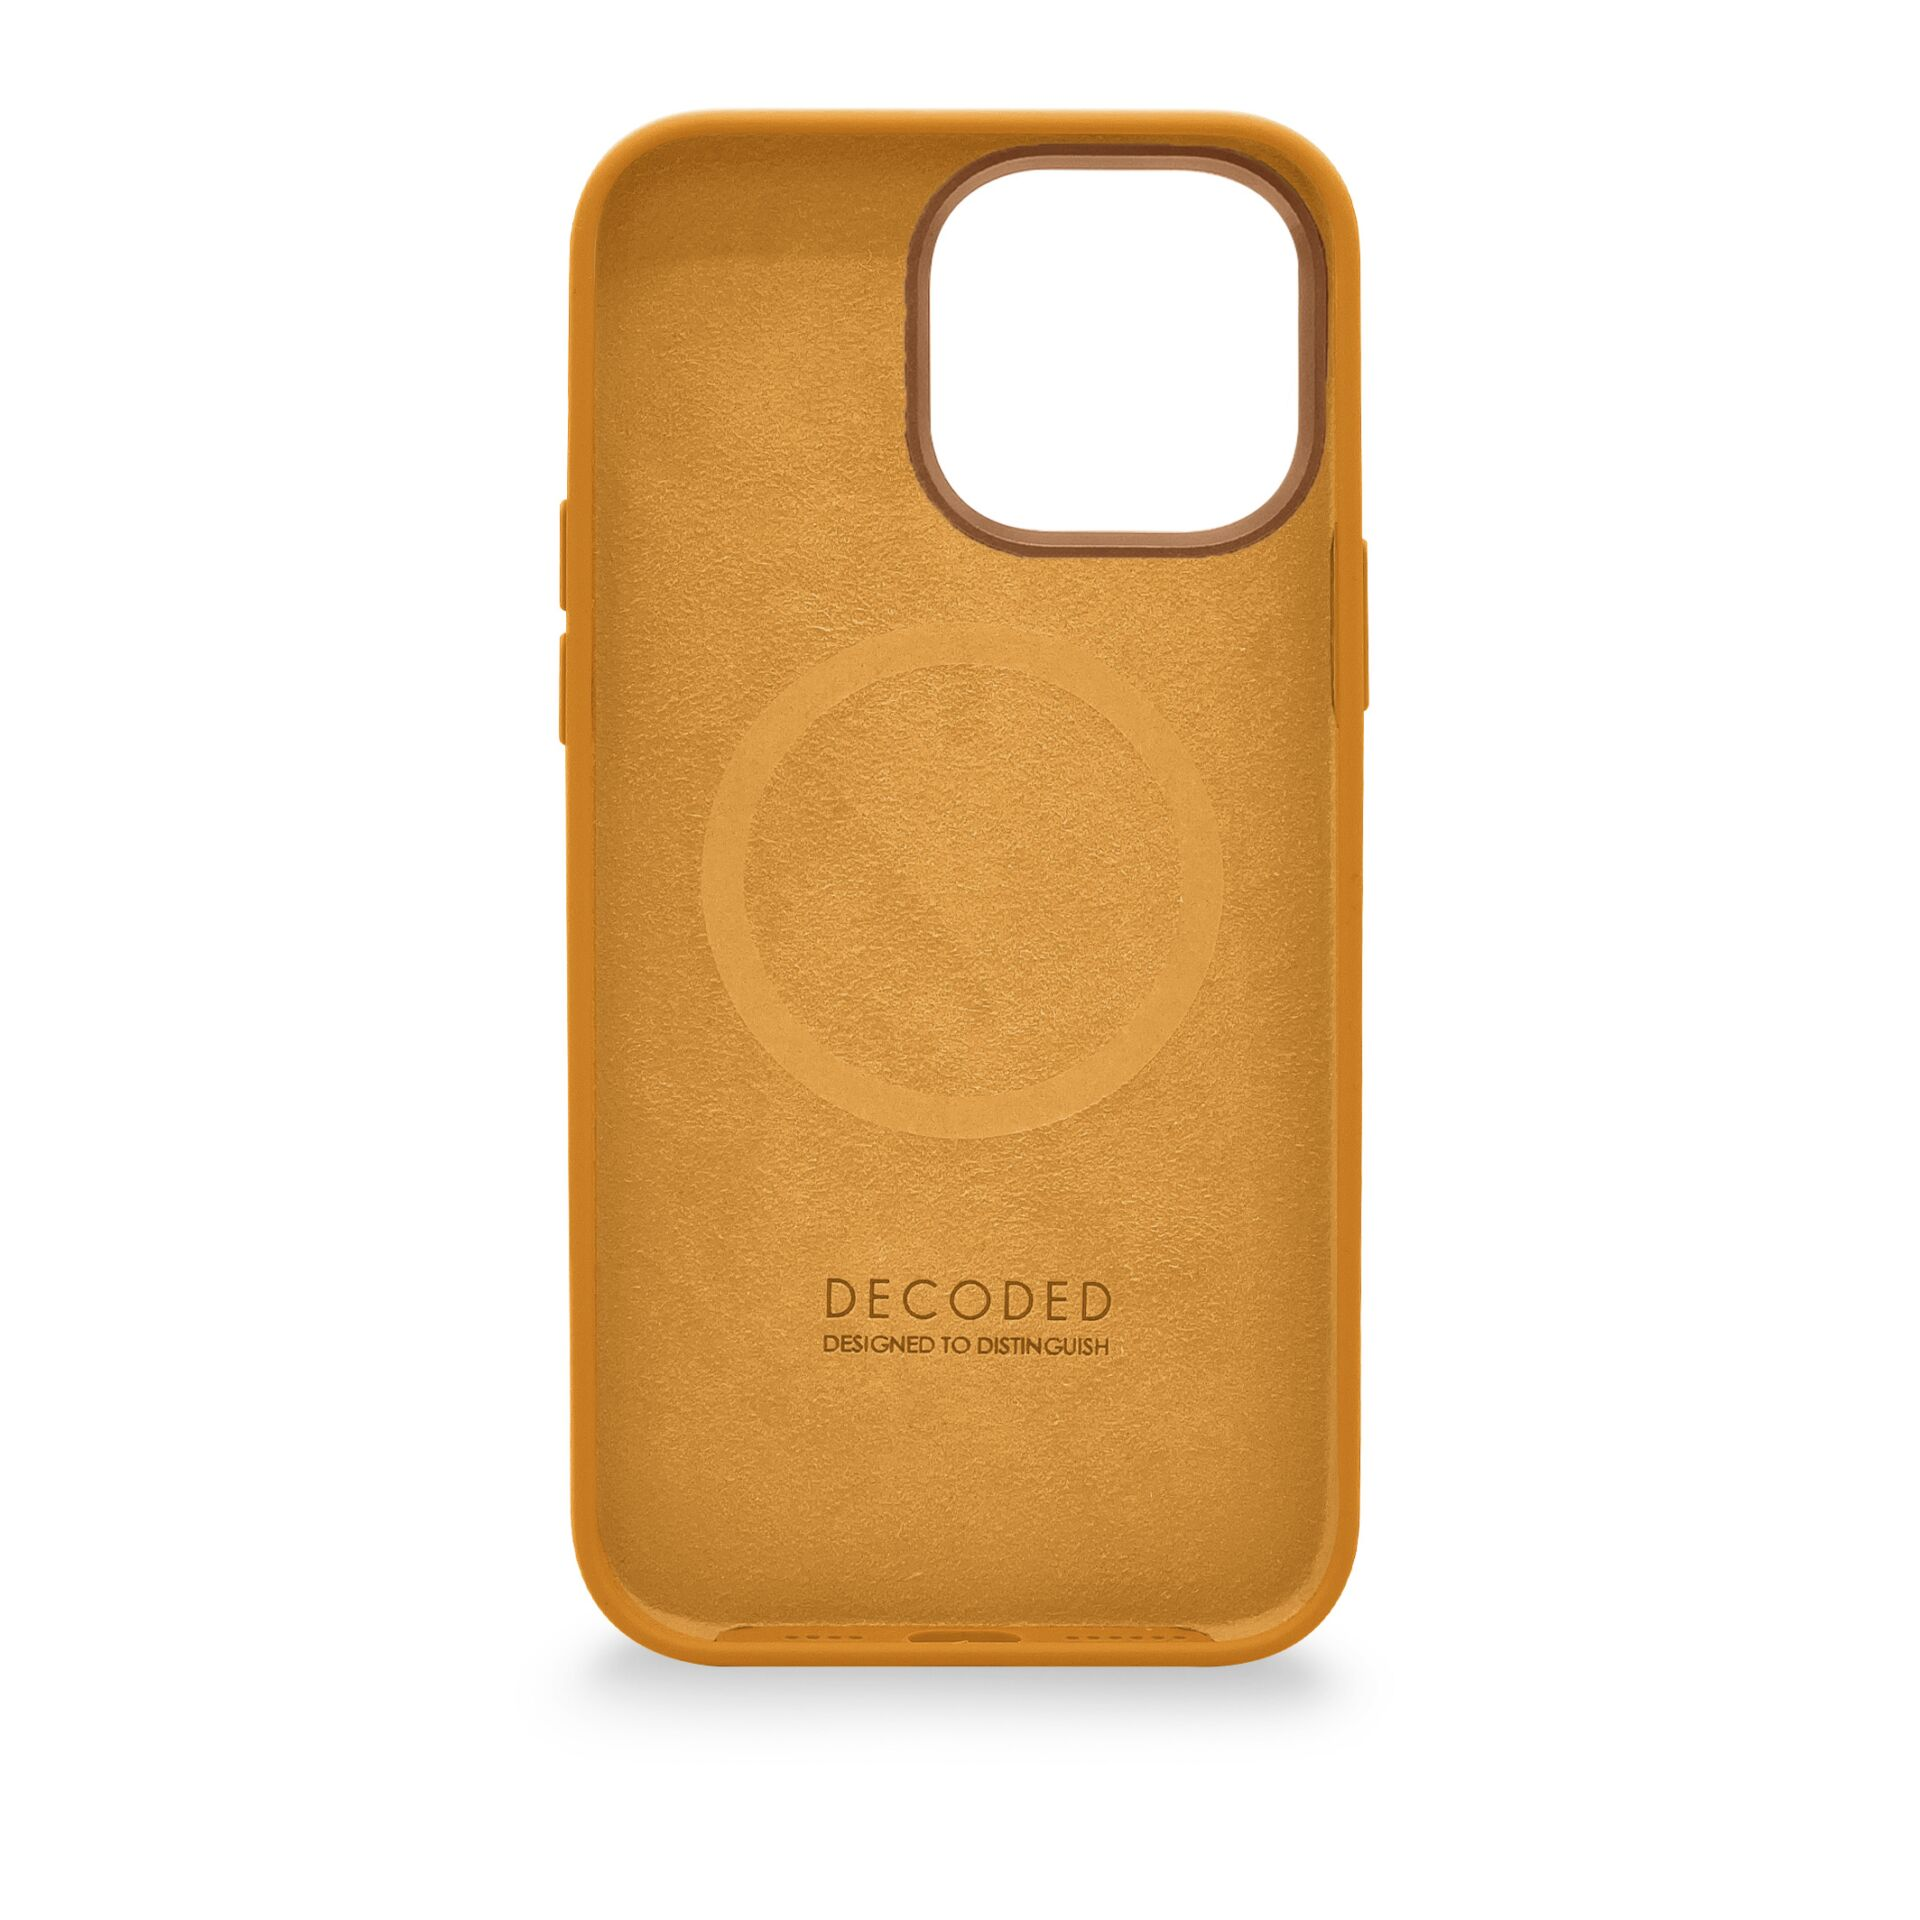 Apricot AntiMicrobial DECODED Backcover Backcover, iPhone Pro, Apricot, Apple, Silicone 14